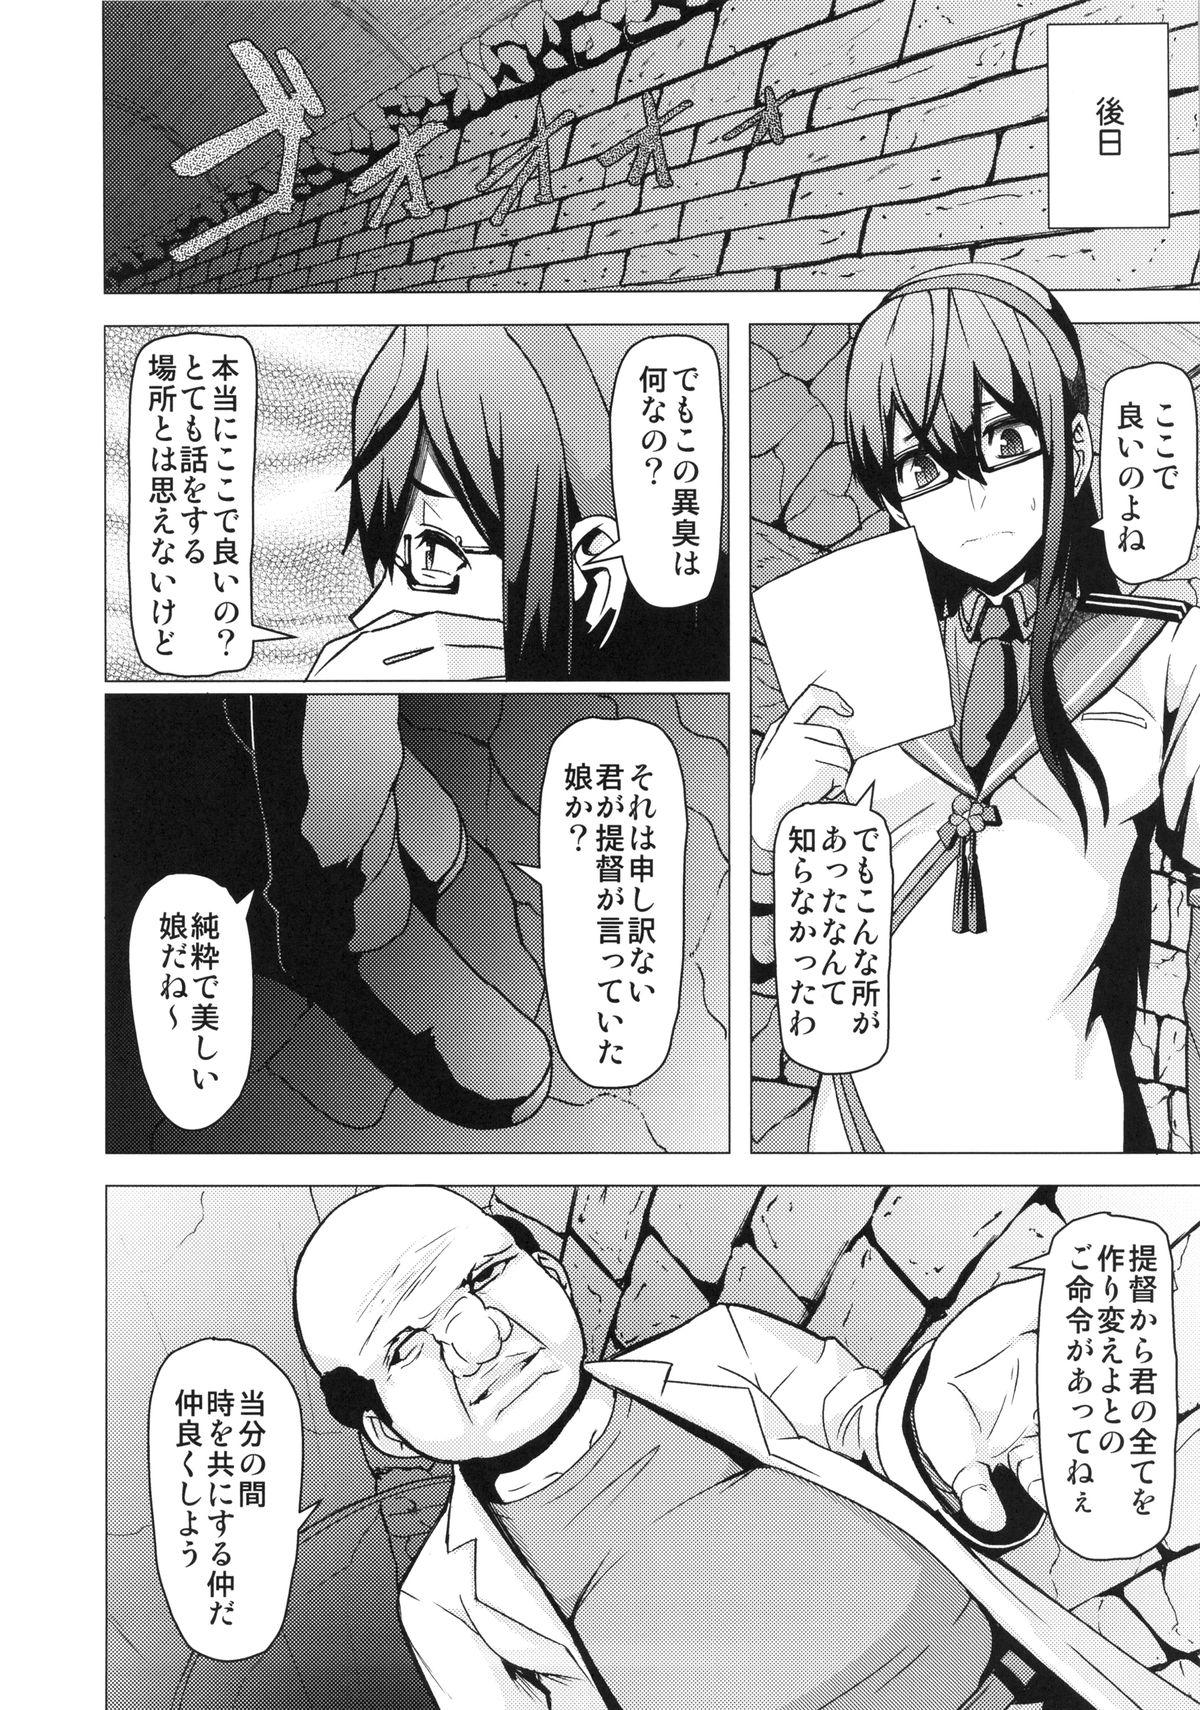 Parody REDLEVEL13 - Kantai collection Firsttime - Page 3